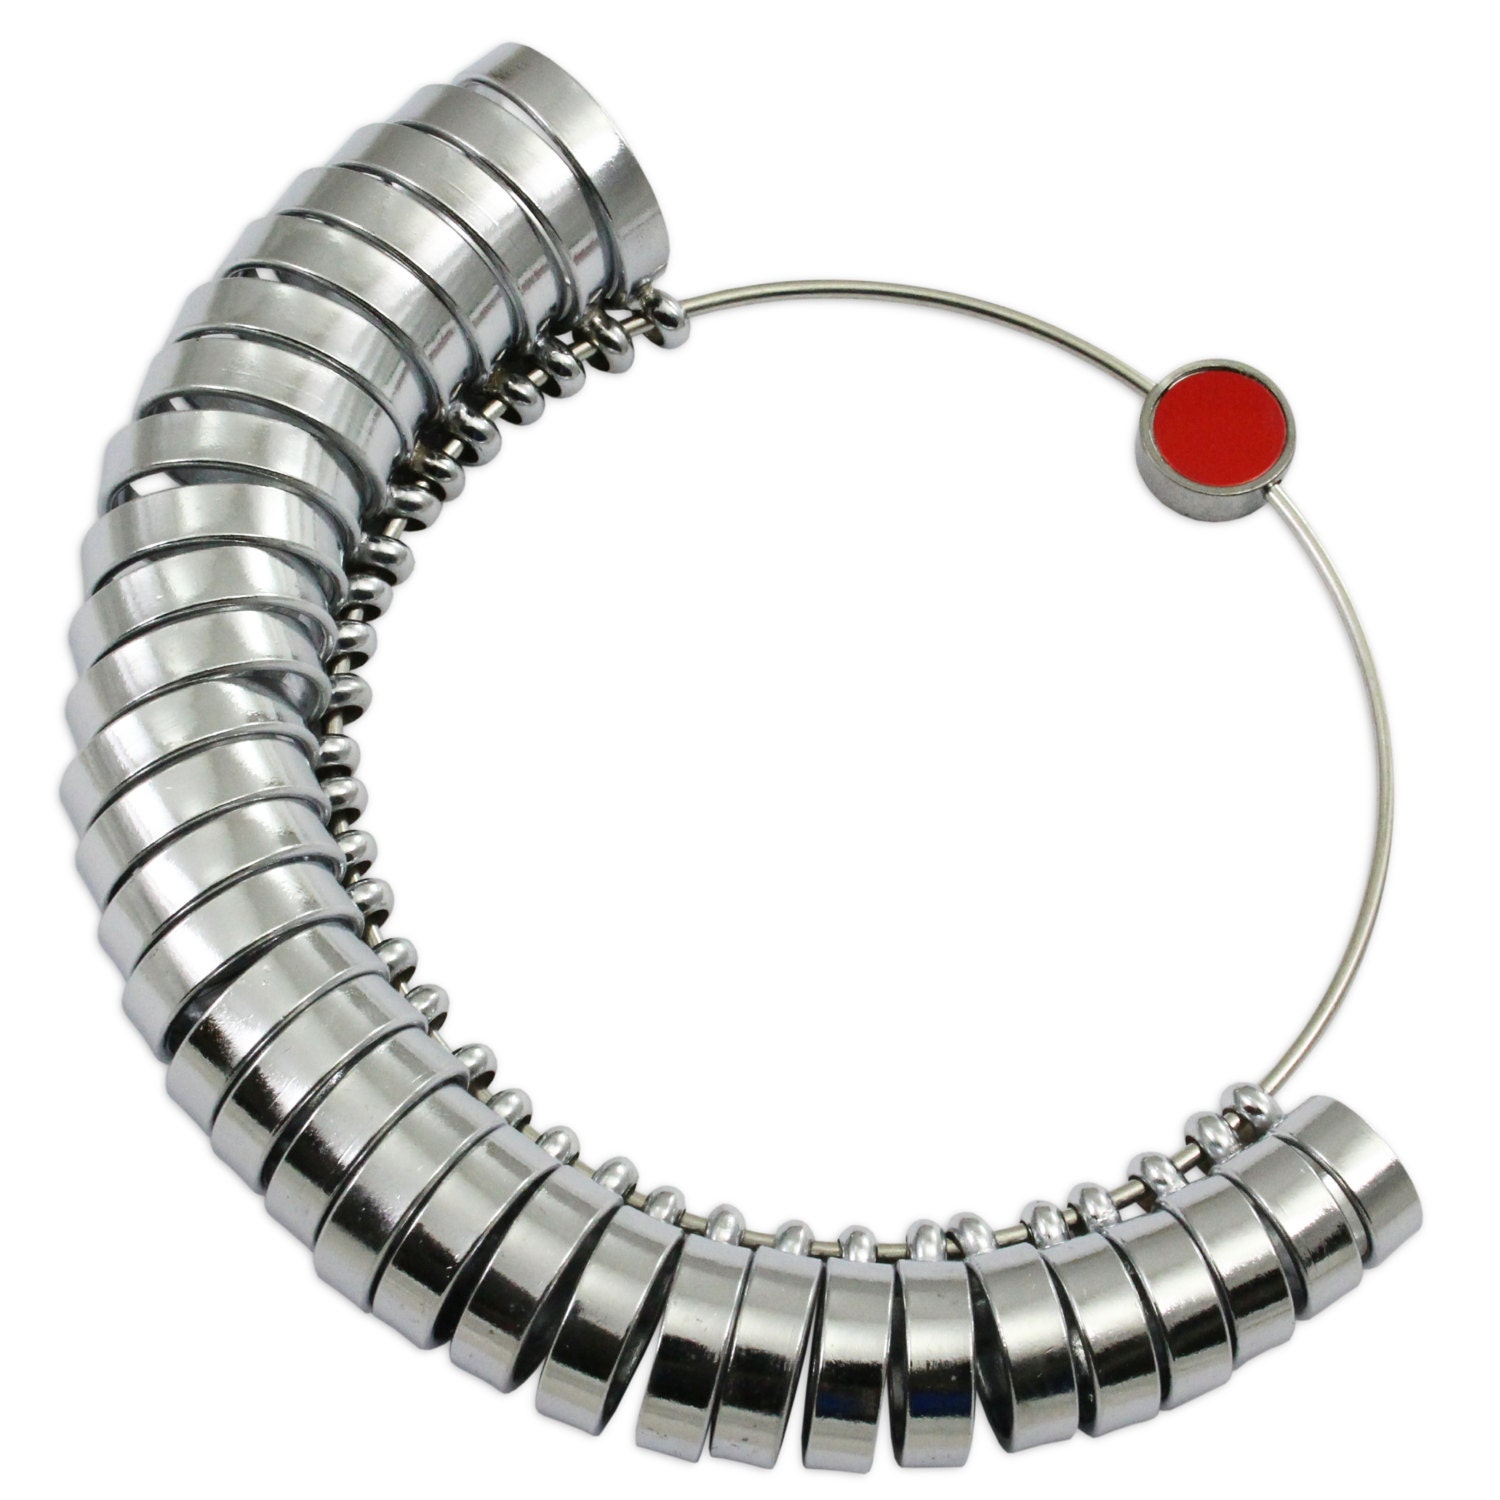 Ring Sizer Tool: Adjustable, Reusable Ring Sizer Tool to Measure Your  Fingers for Ring Size 